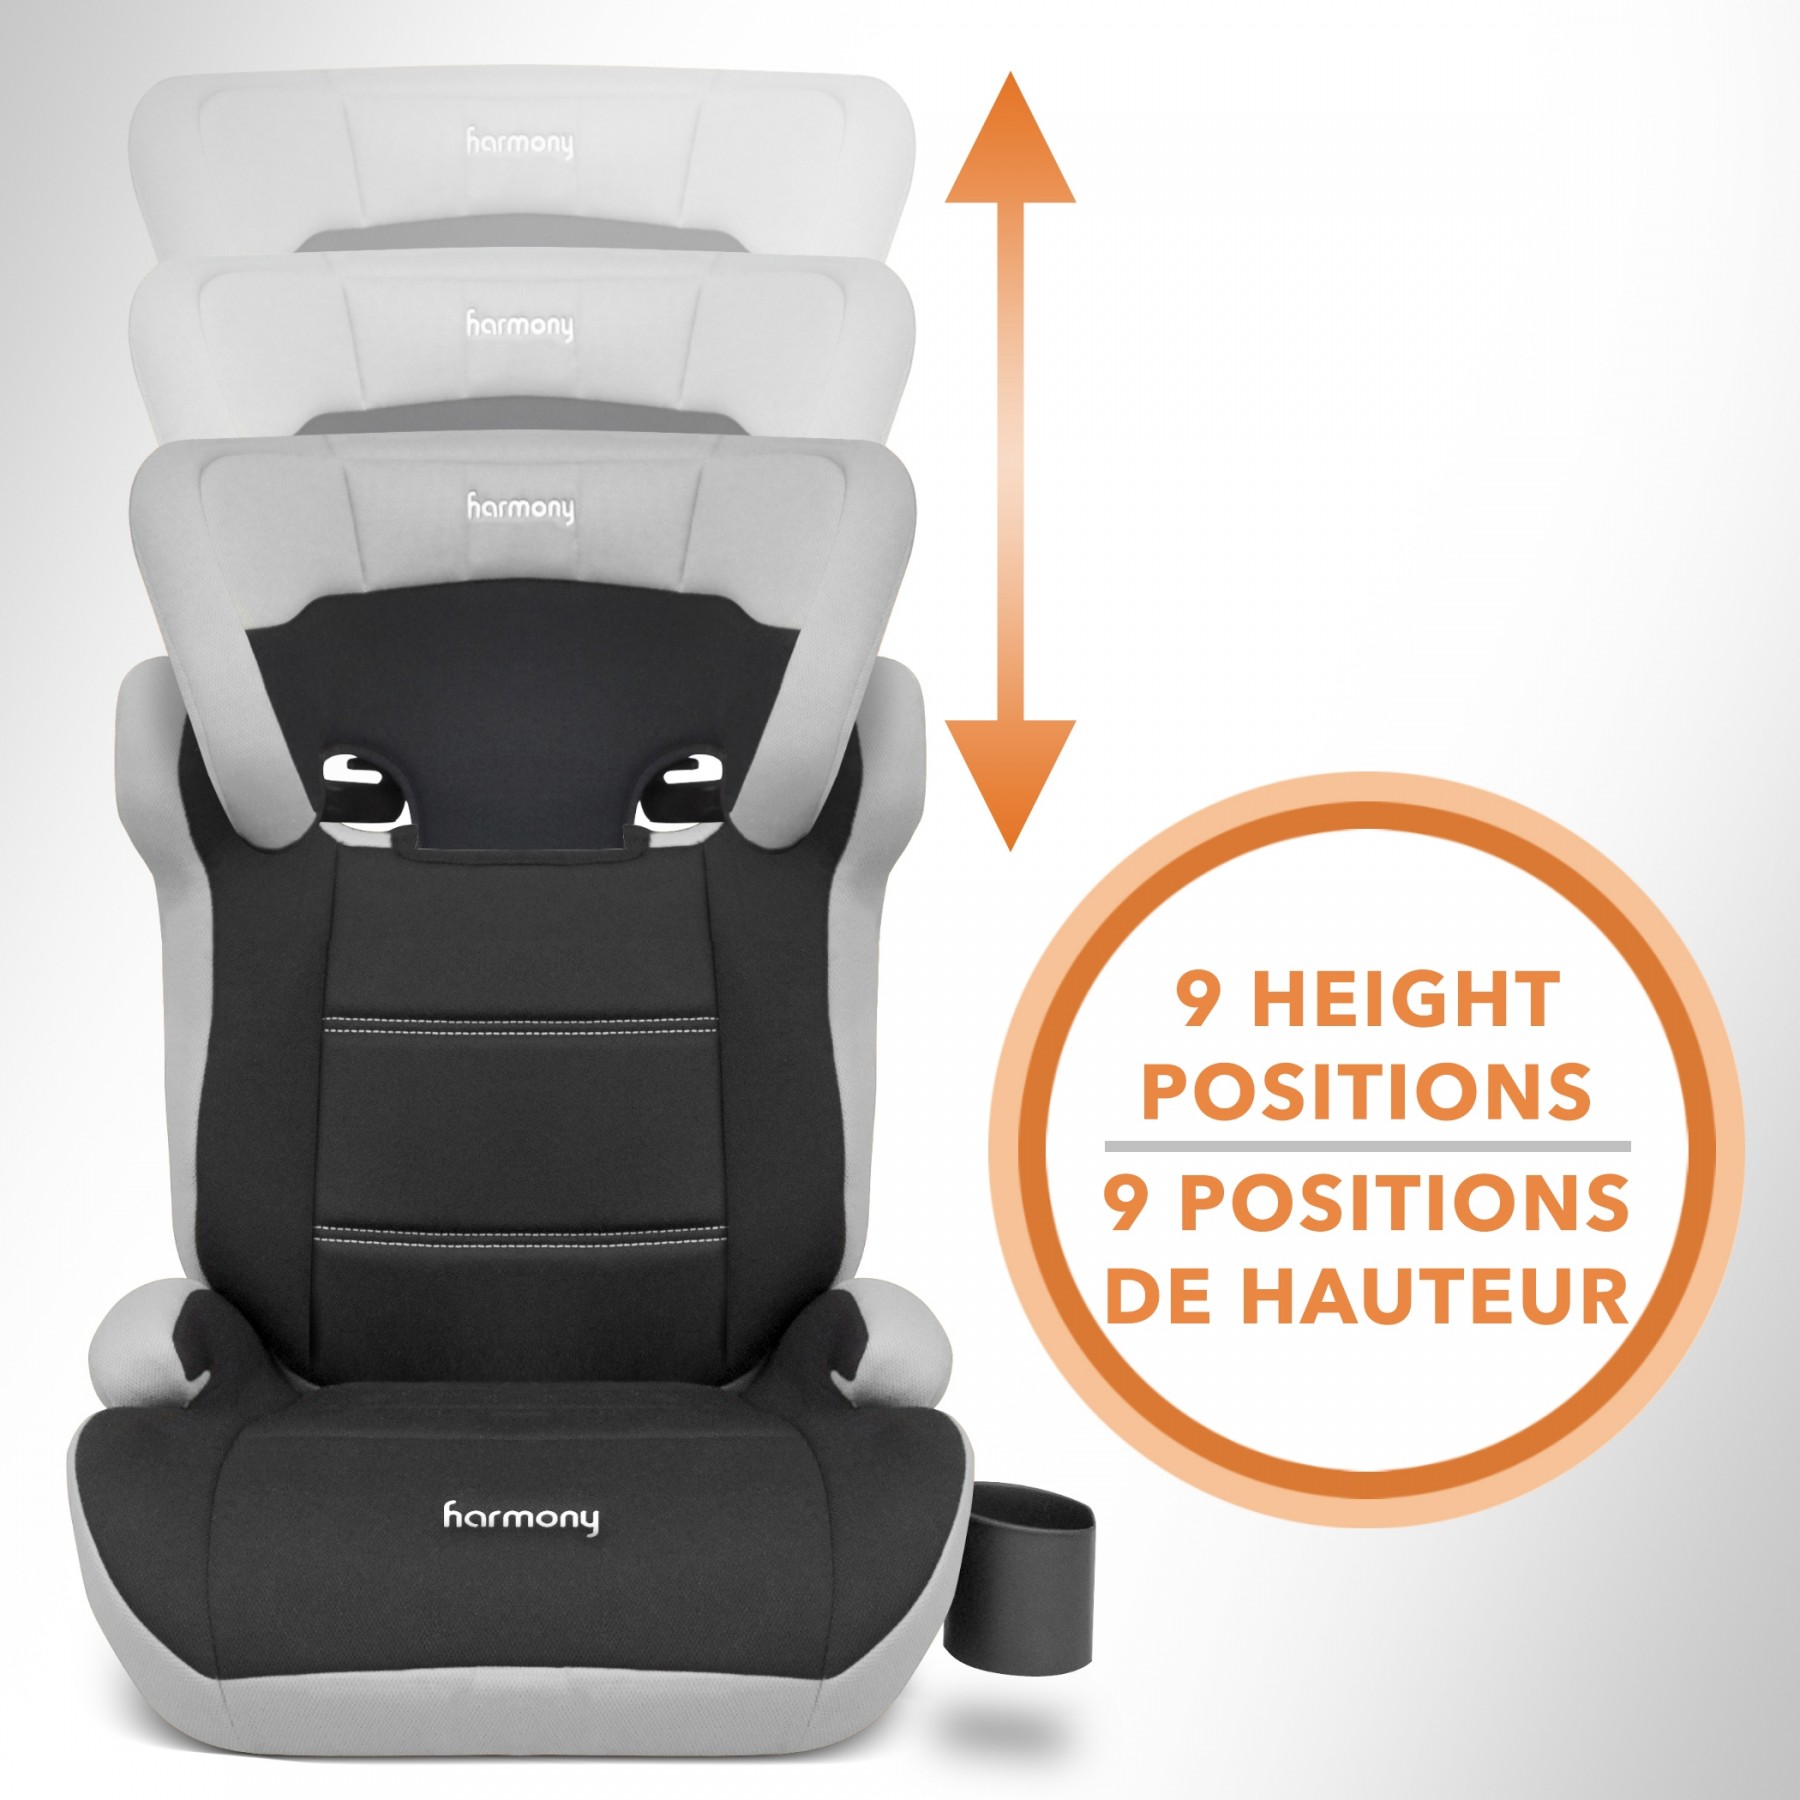 Dreamtime MAX Booster Car Seat - Grey and Black